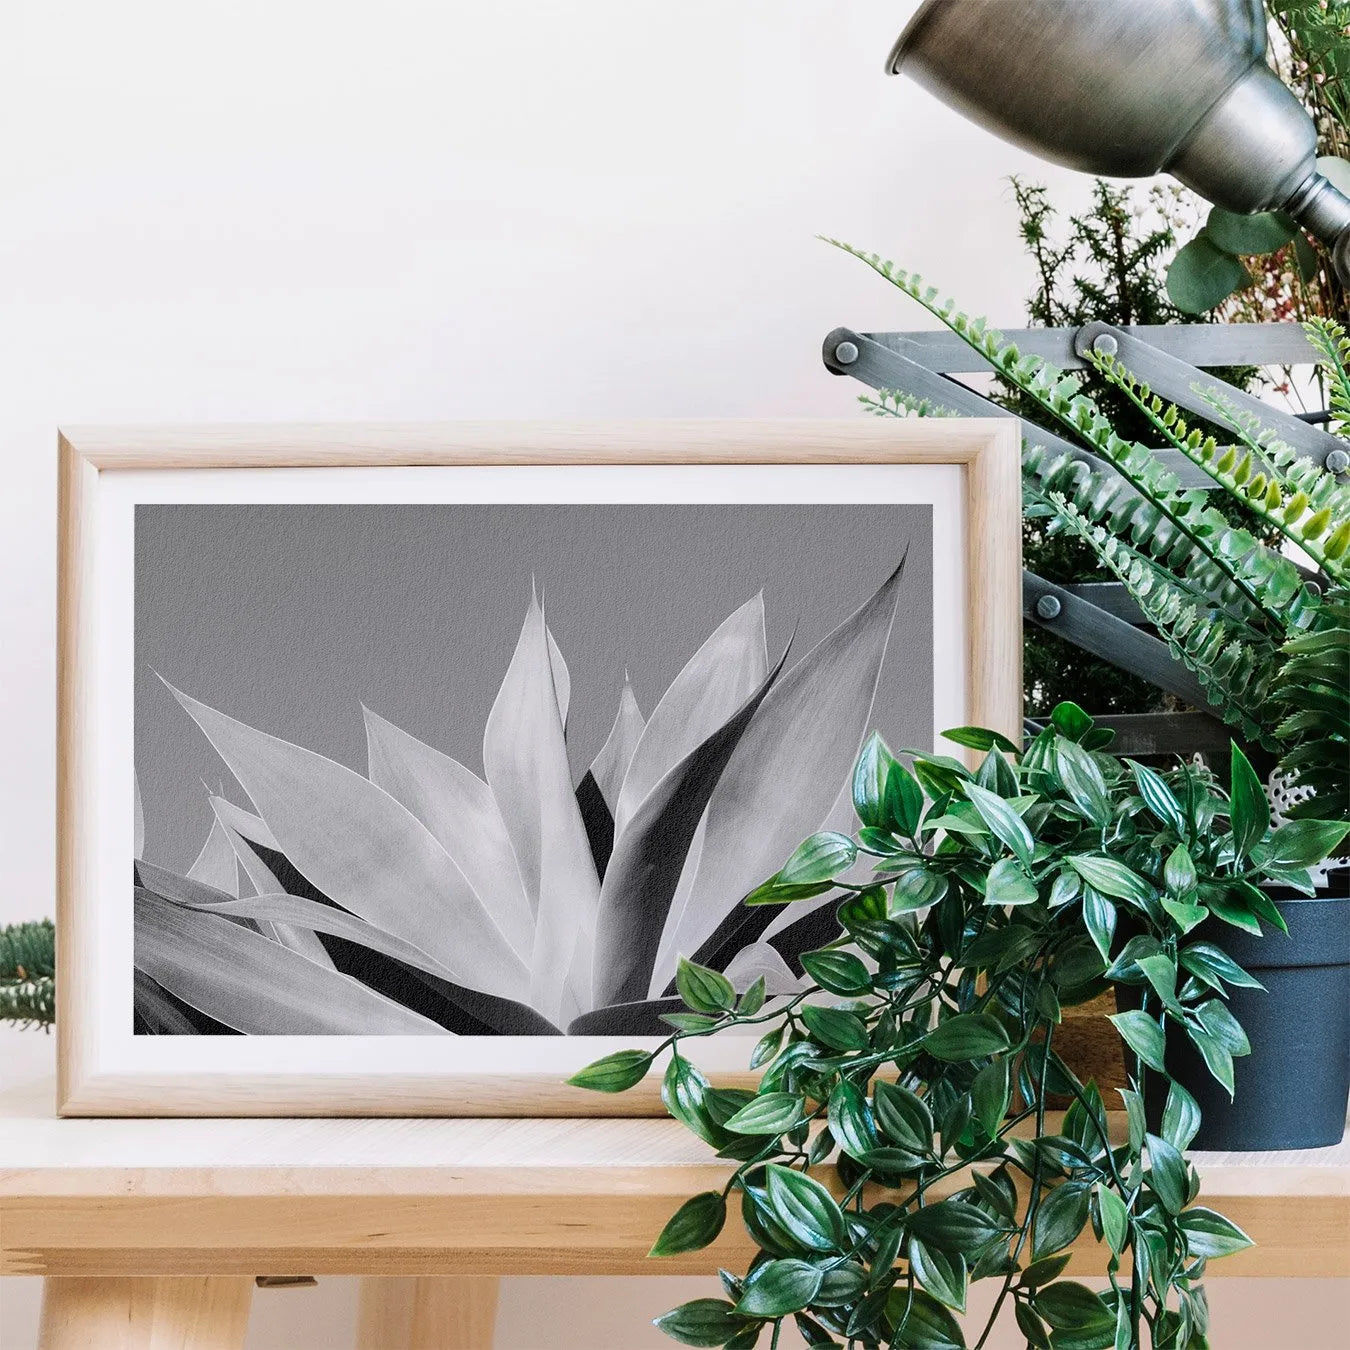 In Bloom - Succulent Black And White Photography Art Print - Posters Prints & Visual Artwork - Aesthetic Art